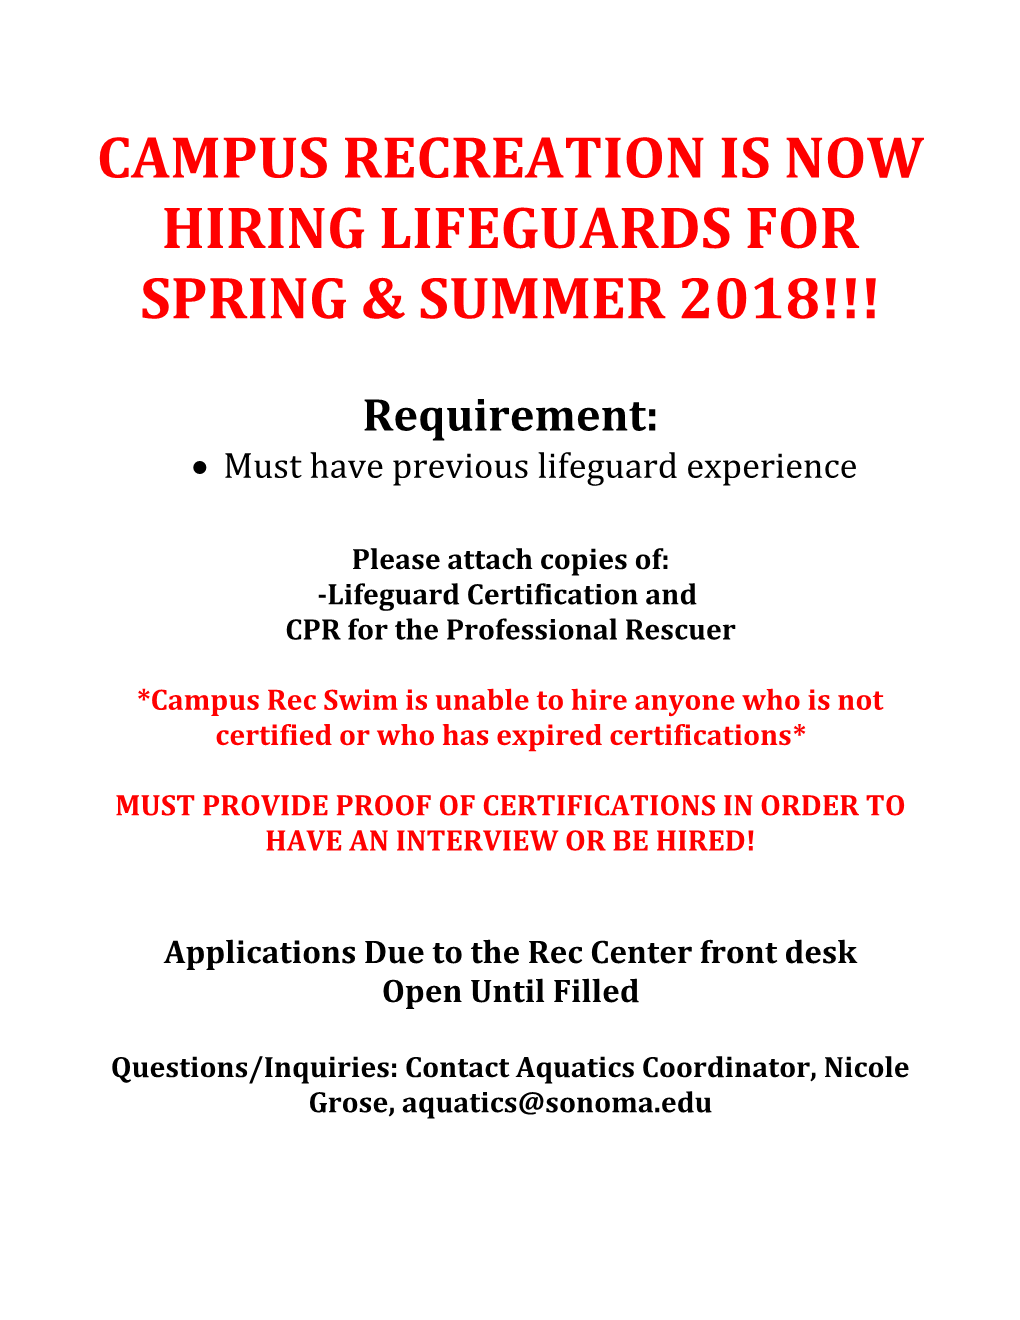 Campus Recreation Is Now Hiring Lifeguards for Spring & Summer 2018